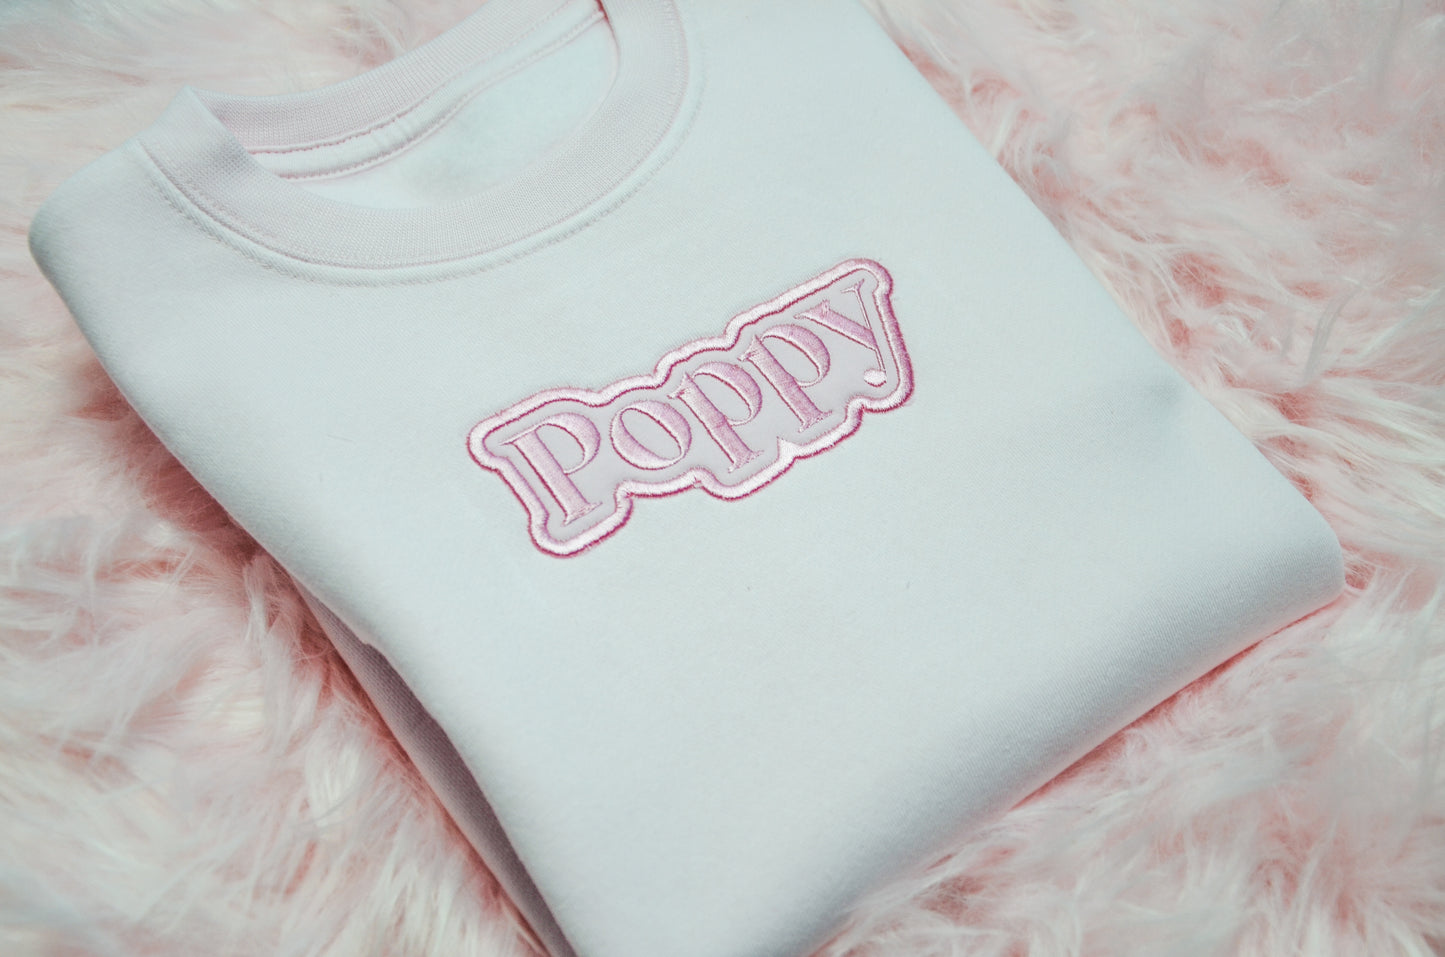 Bubble Name - Embroidered Sweatshirt / Jumper